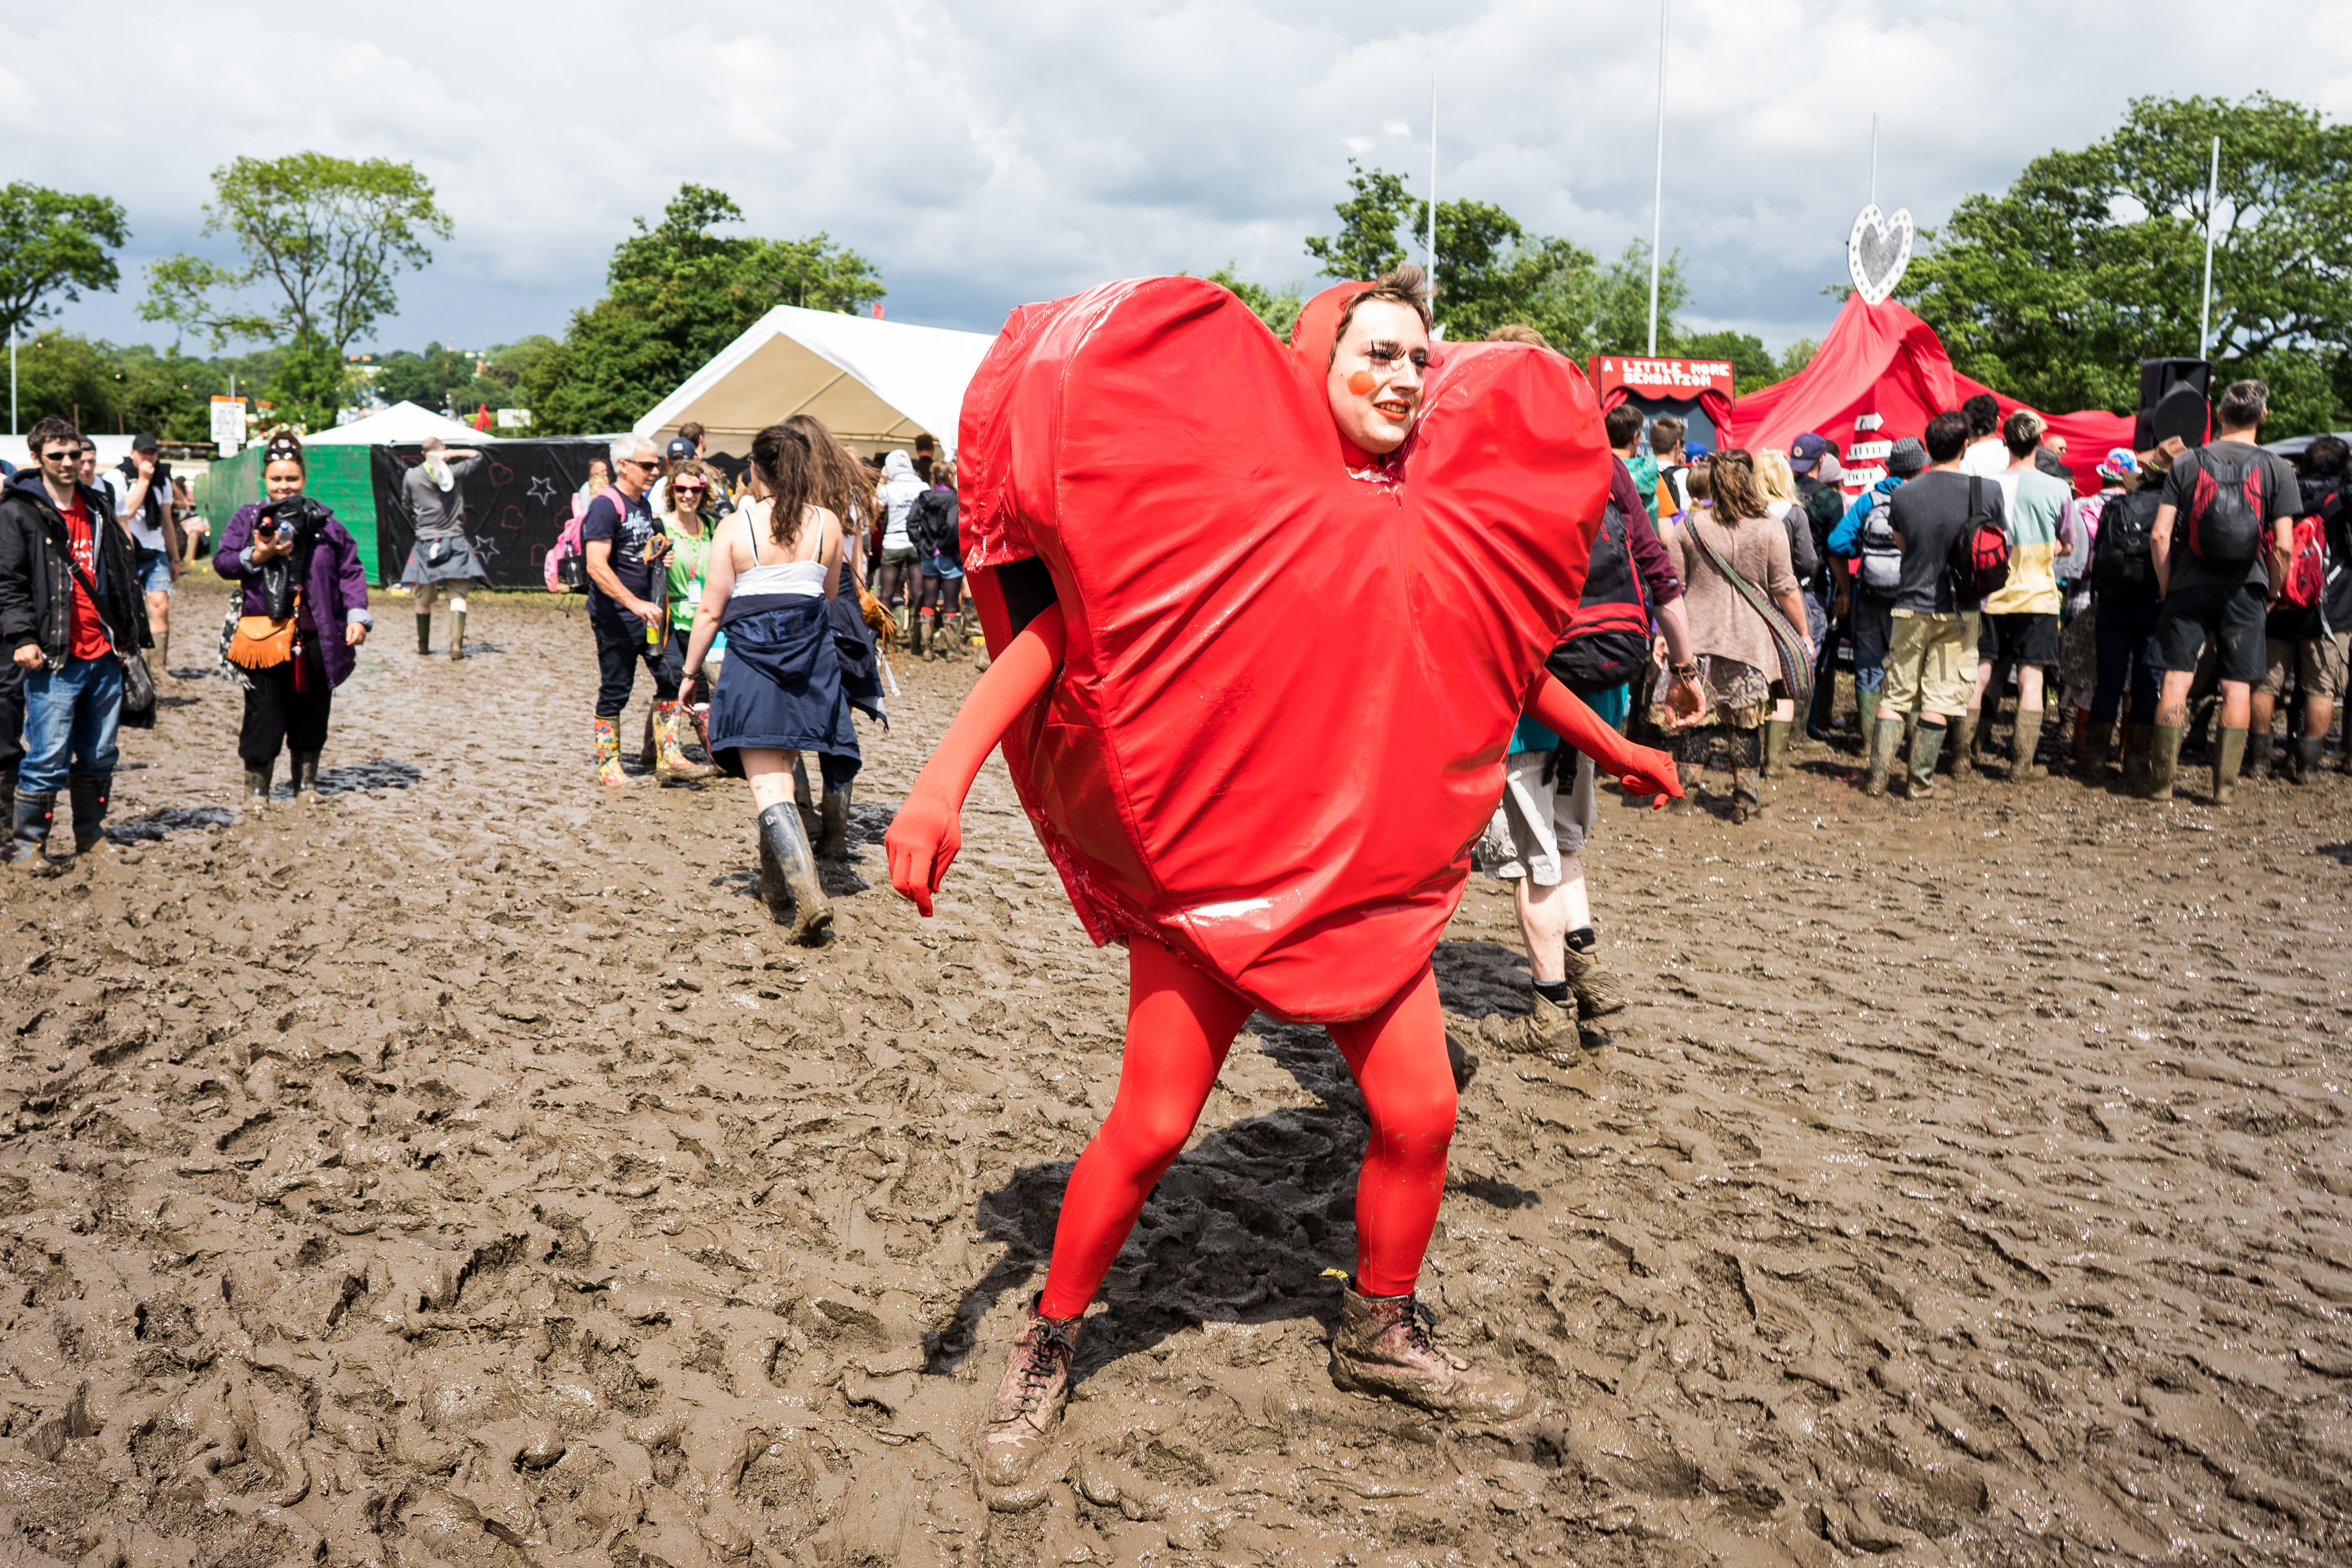 An actor wears a heart-shaped costume in the circus area in 2016